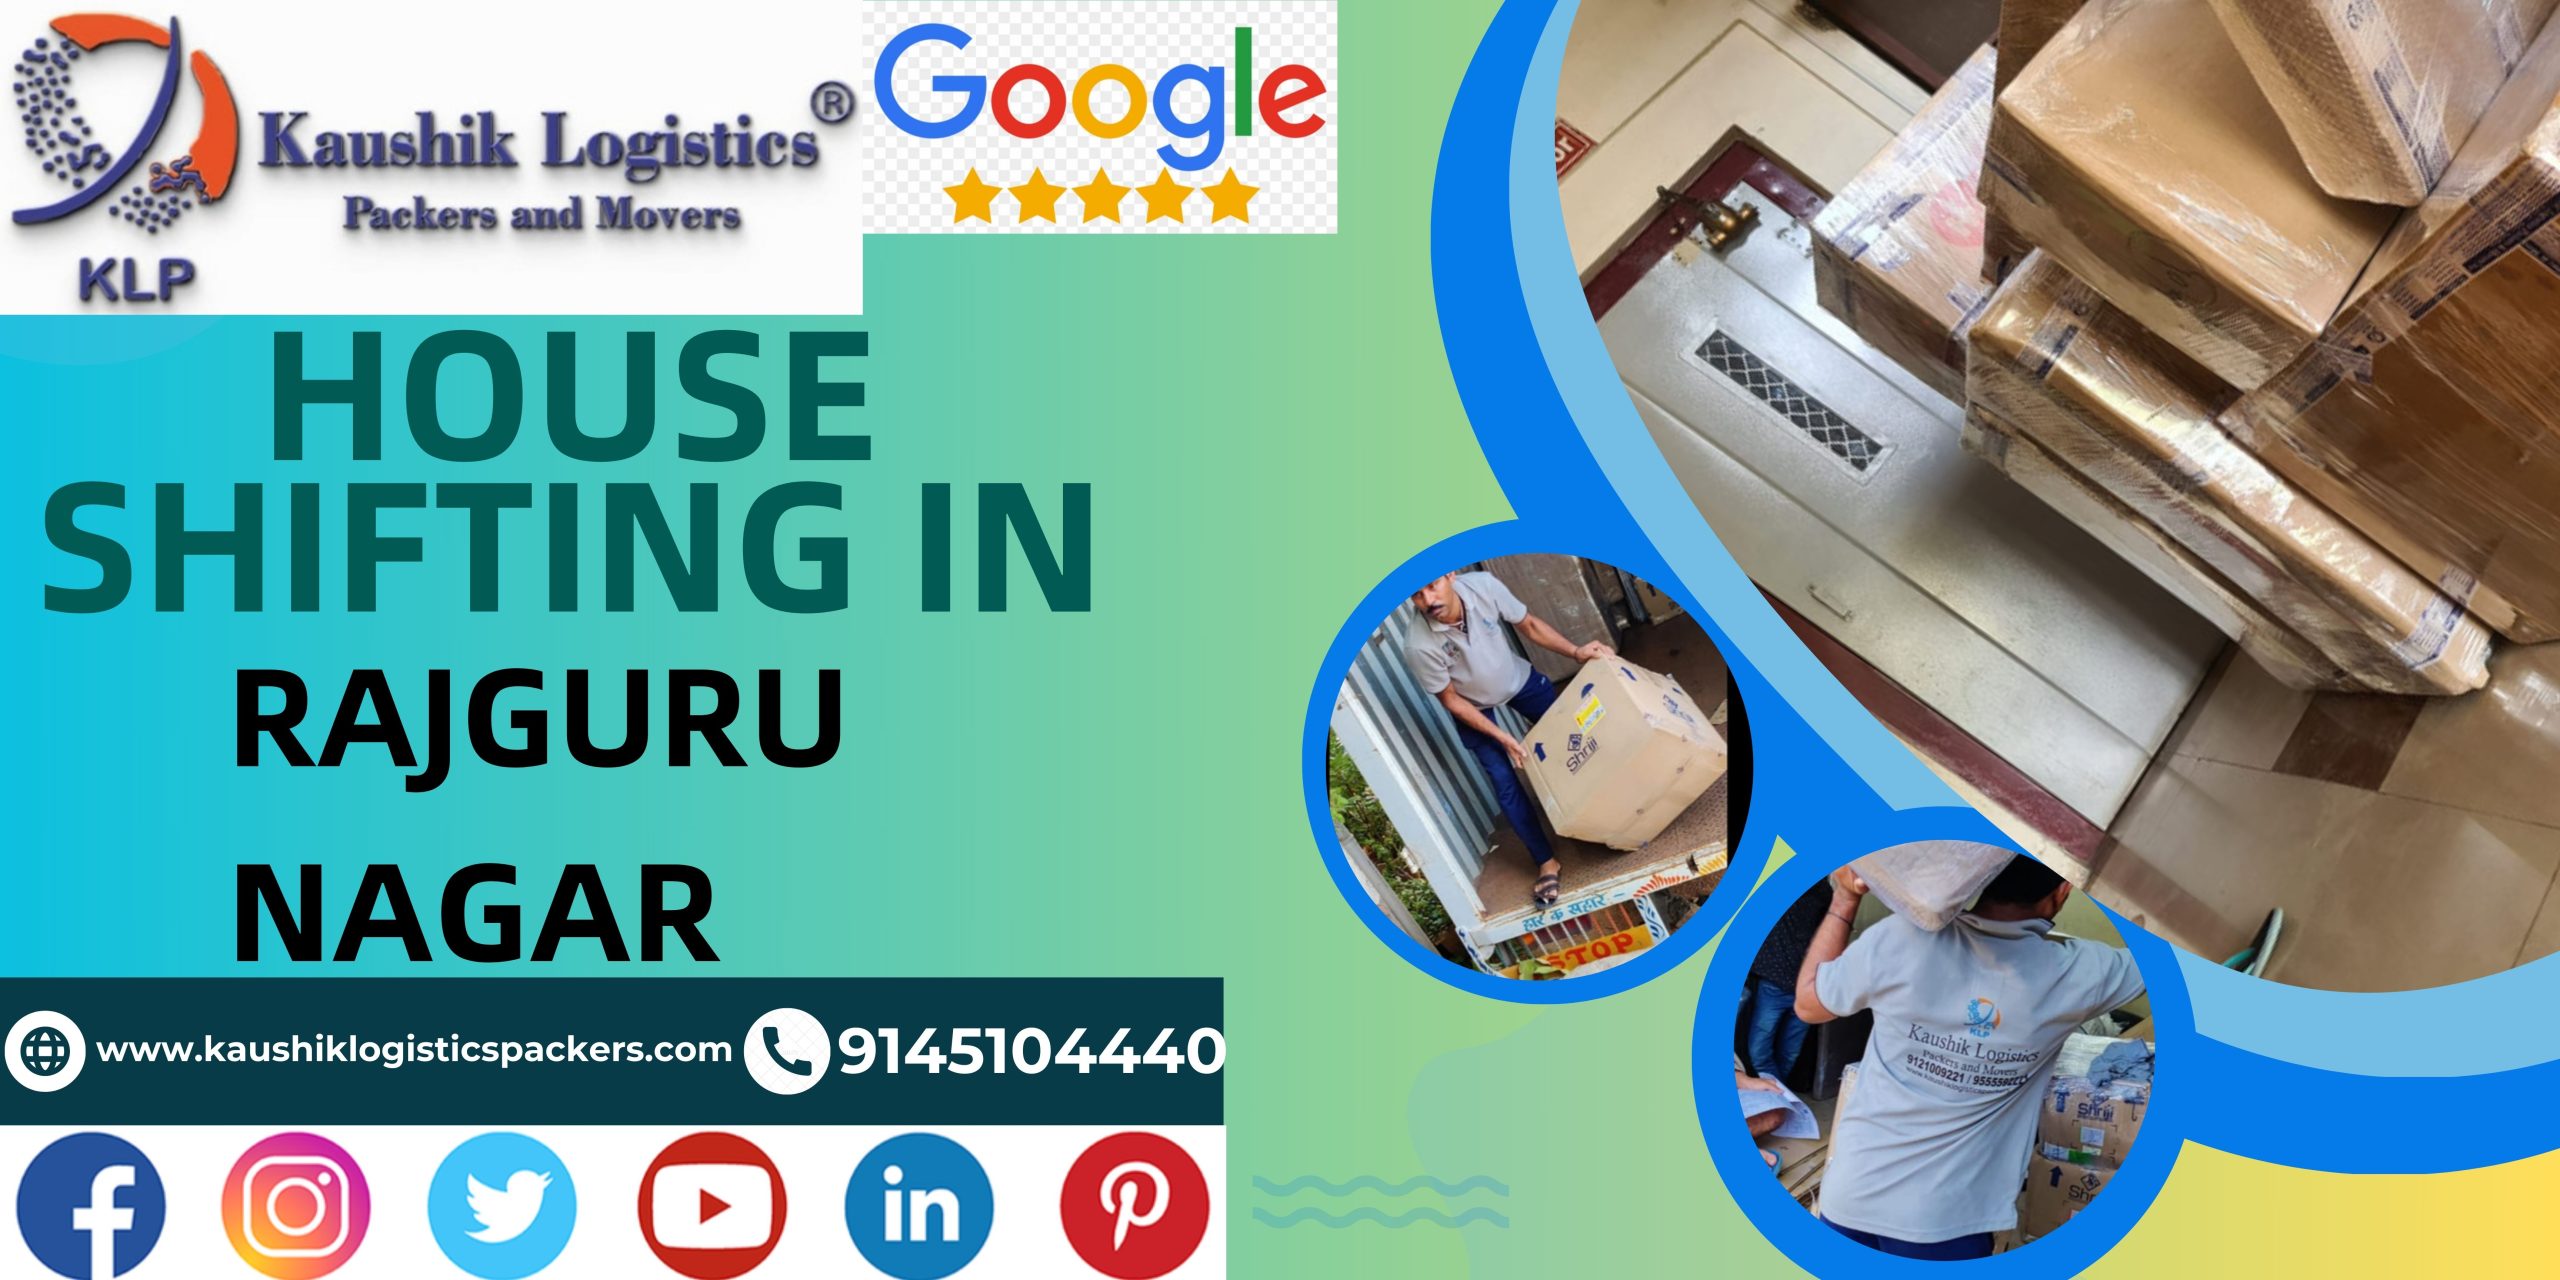 Packers and Movers In Rajgurunagar